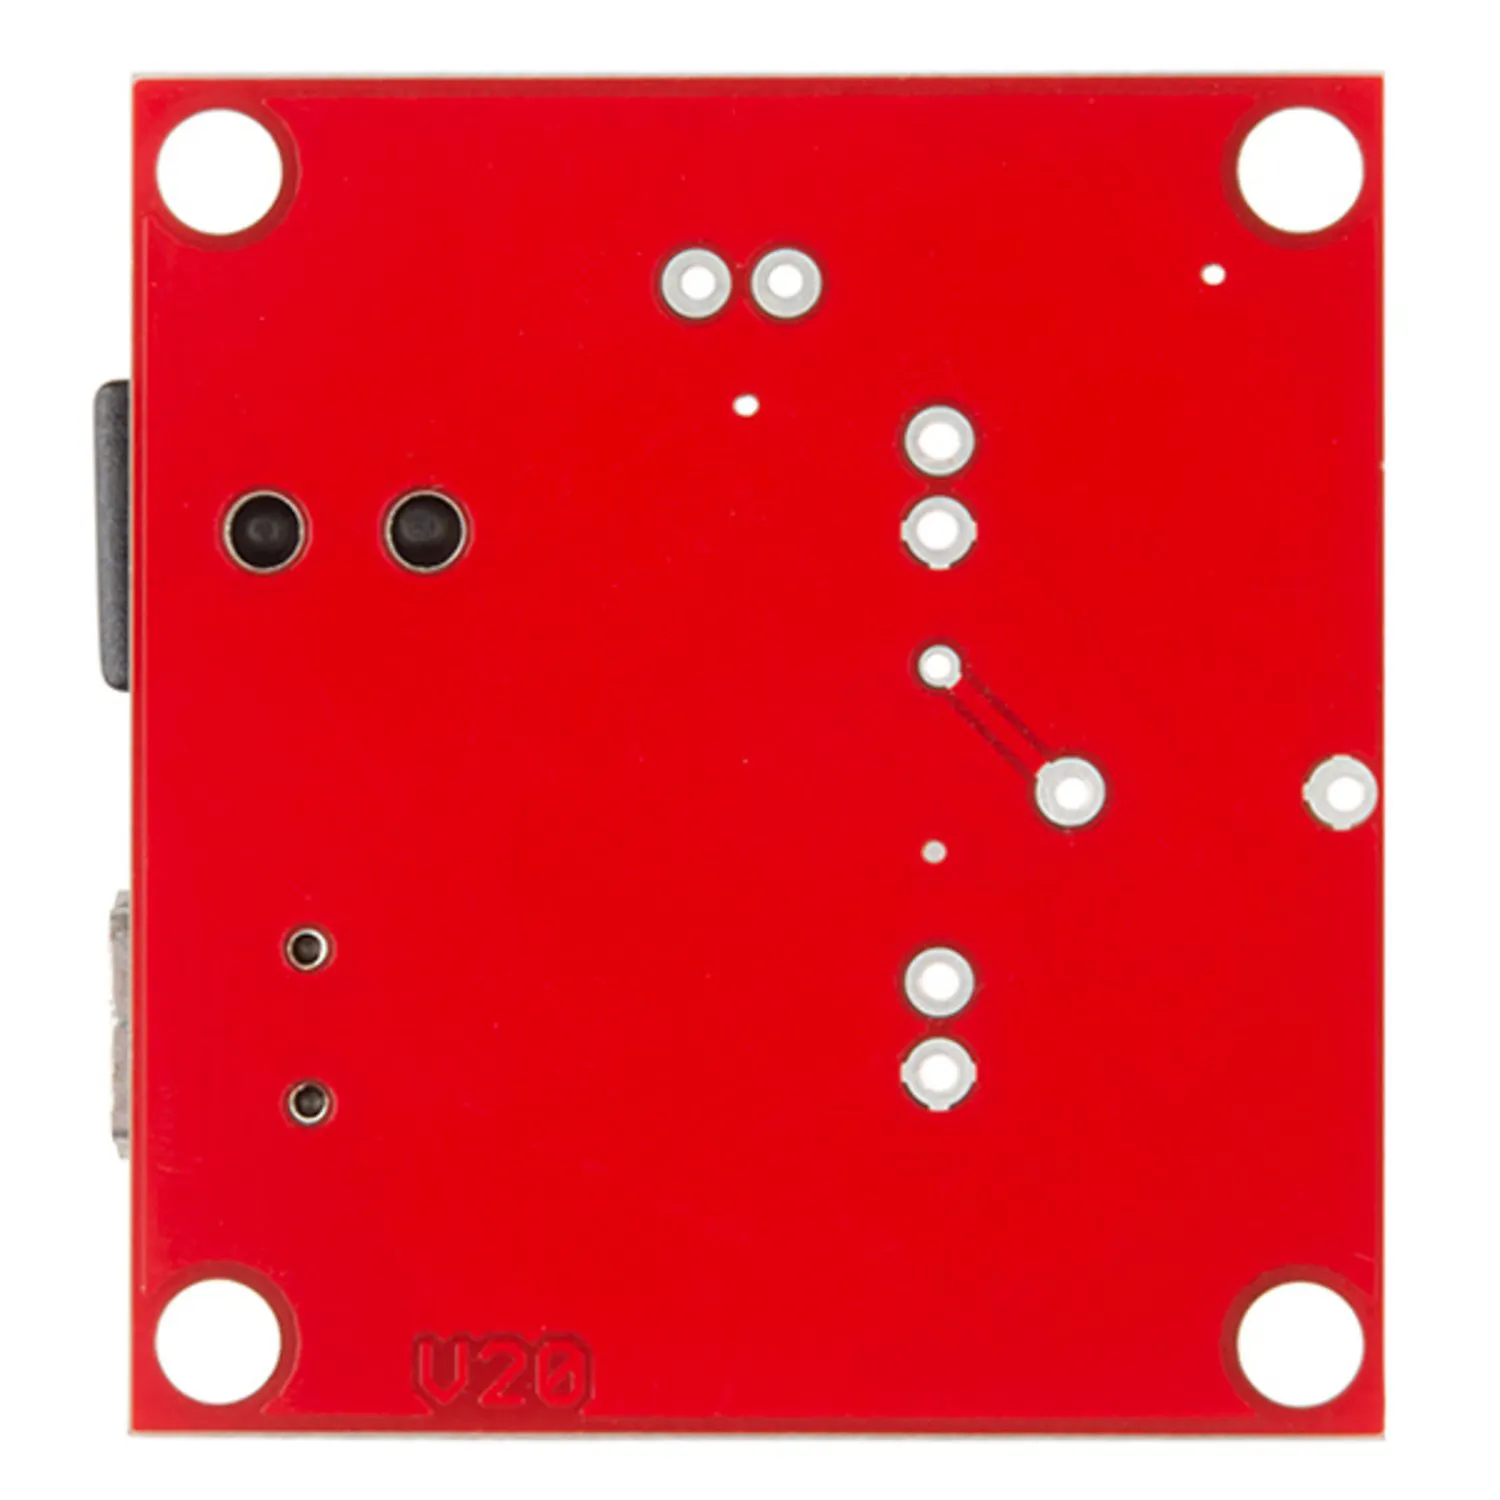 Photo of SparkFun USB LiPoly Charger - Single Cell